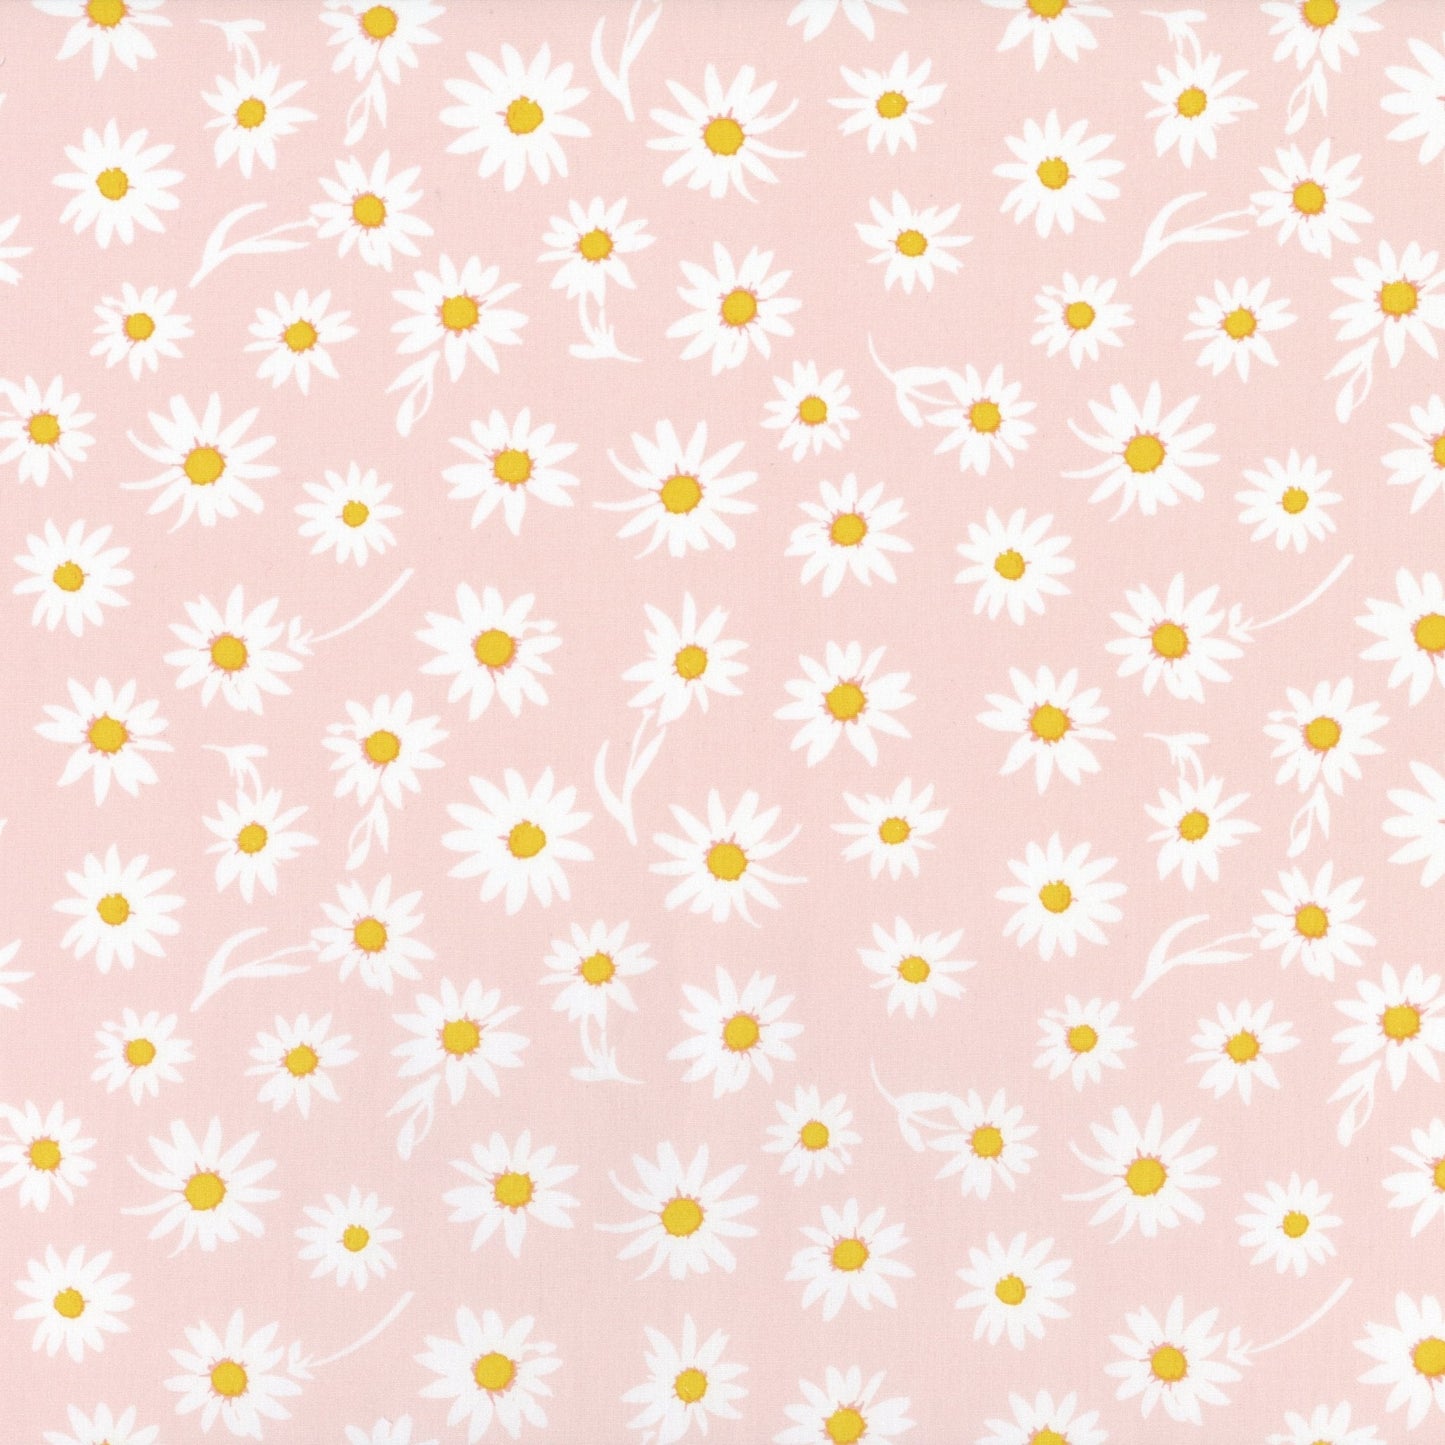 Morning Glory Flower Swatch - New Arrivals Inc